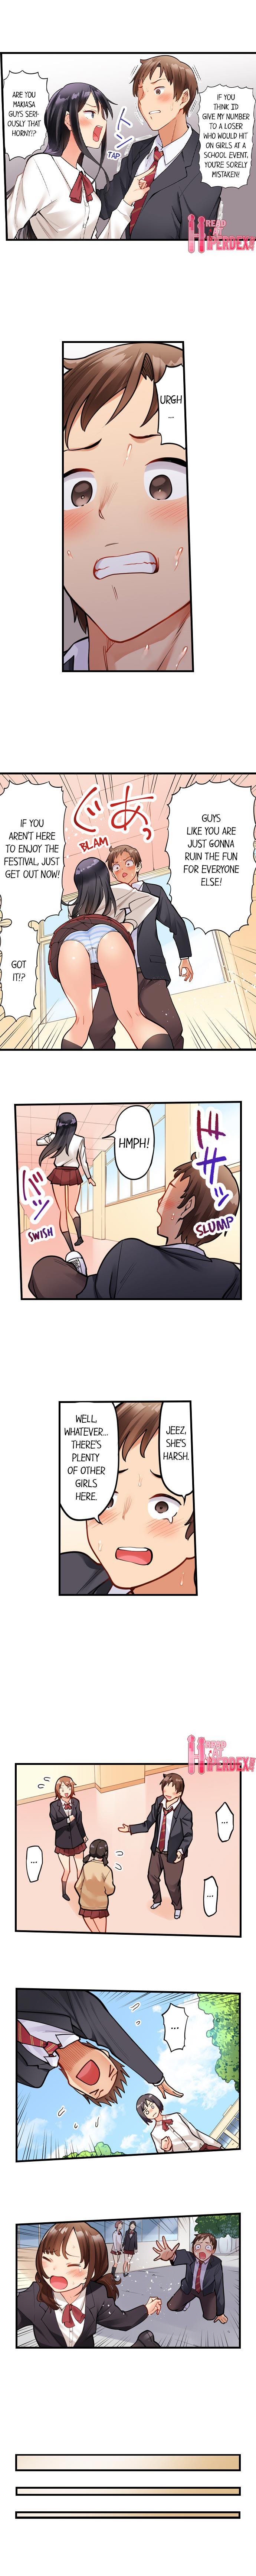 Oil Massage at the Culture Festival - Chapter 1 Page 5